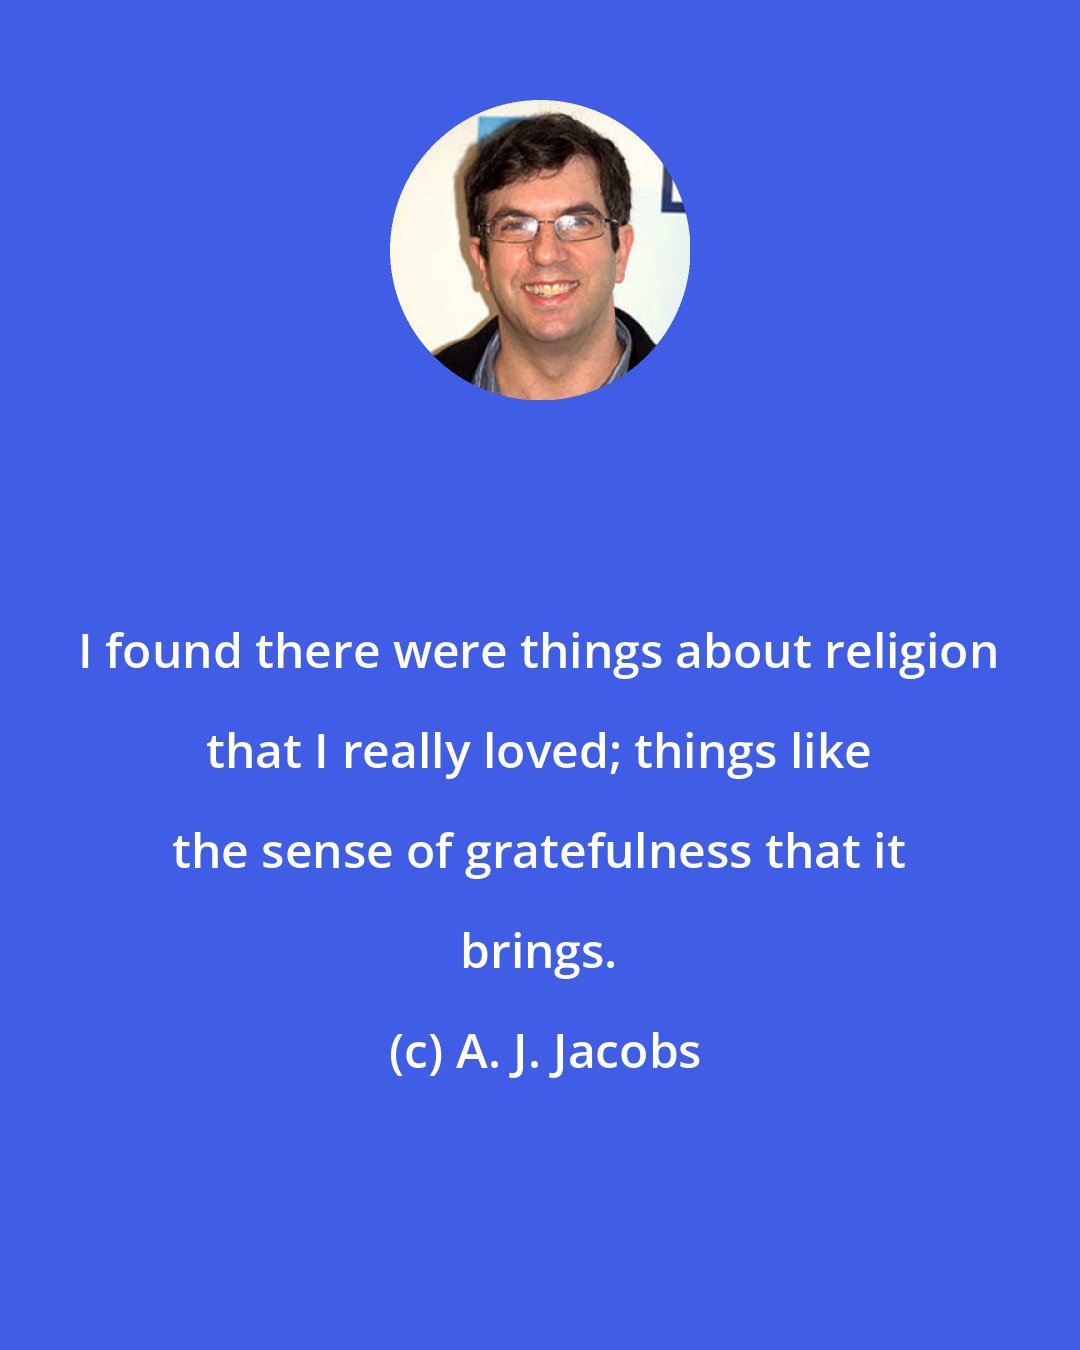 A. J. Jacobs: I found there were things about religion that I really loved; things like the sense of gratefulness that it brings.